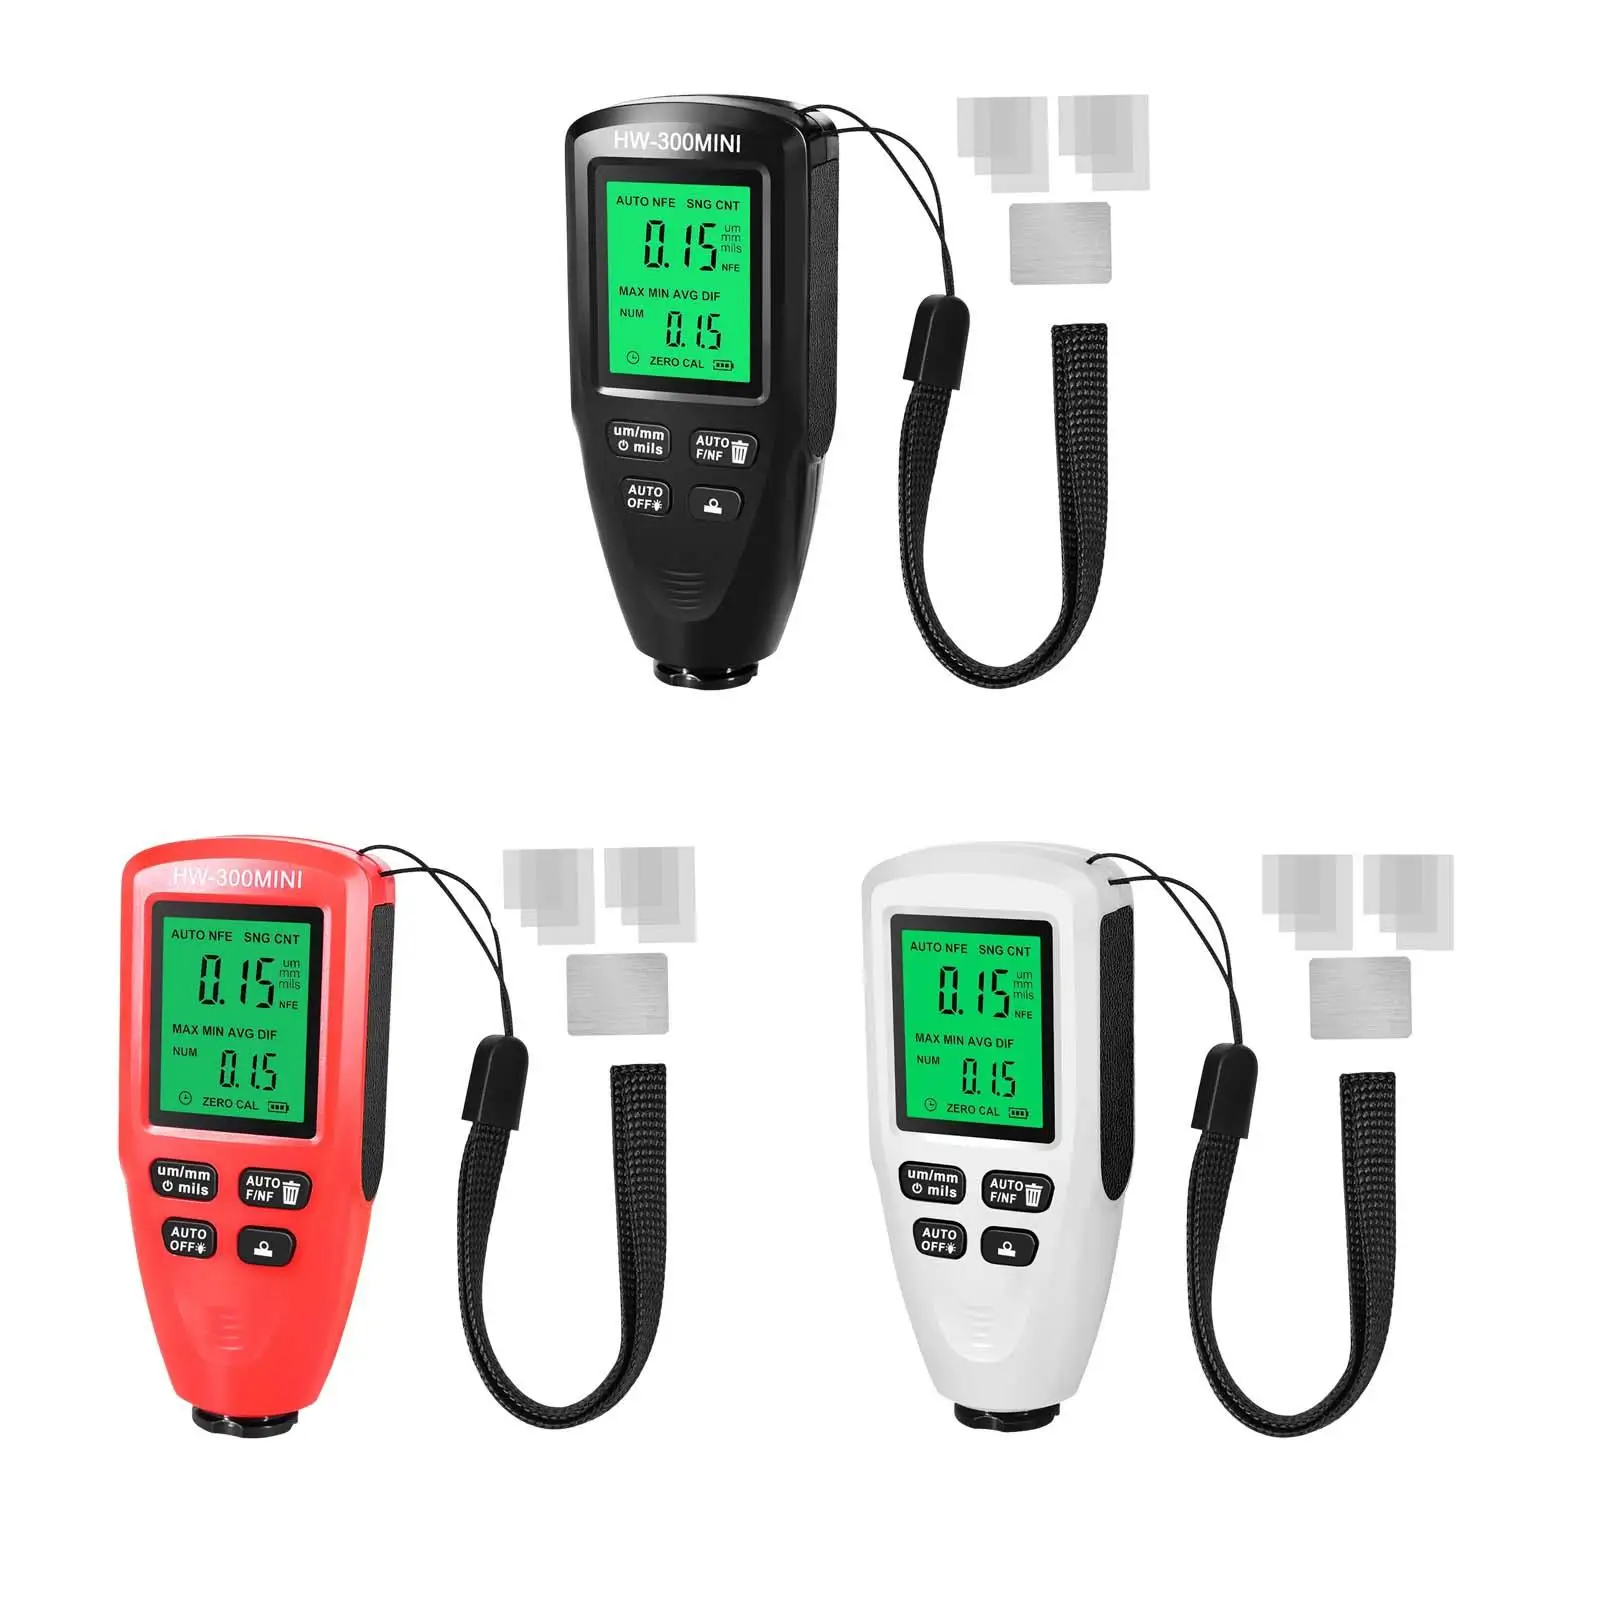 Car Coating Thickness Meter 0-2000Um Paint Thickness Gauge Painting Depth Gauge for Iron and Aluminium Bodies Workshops